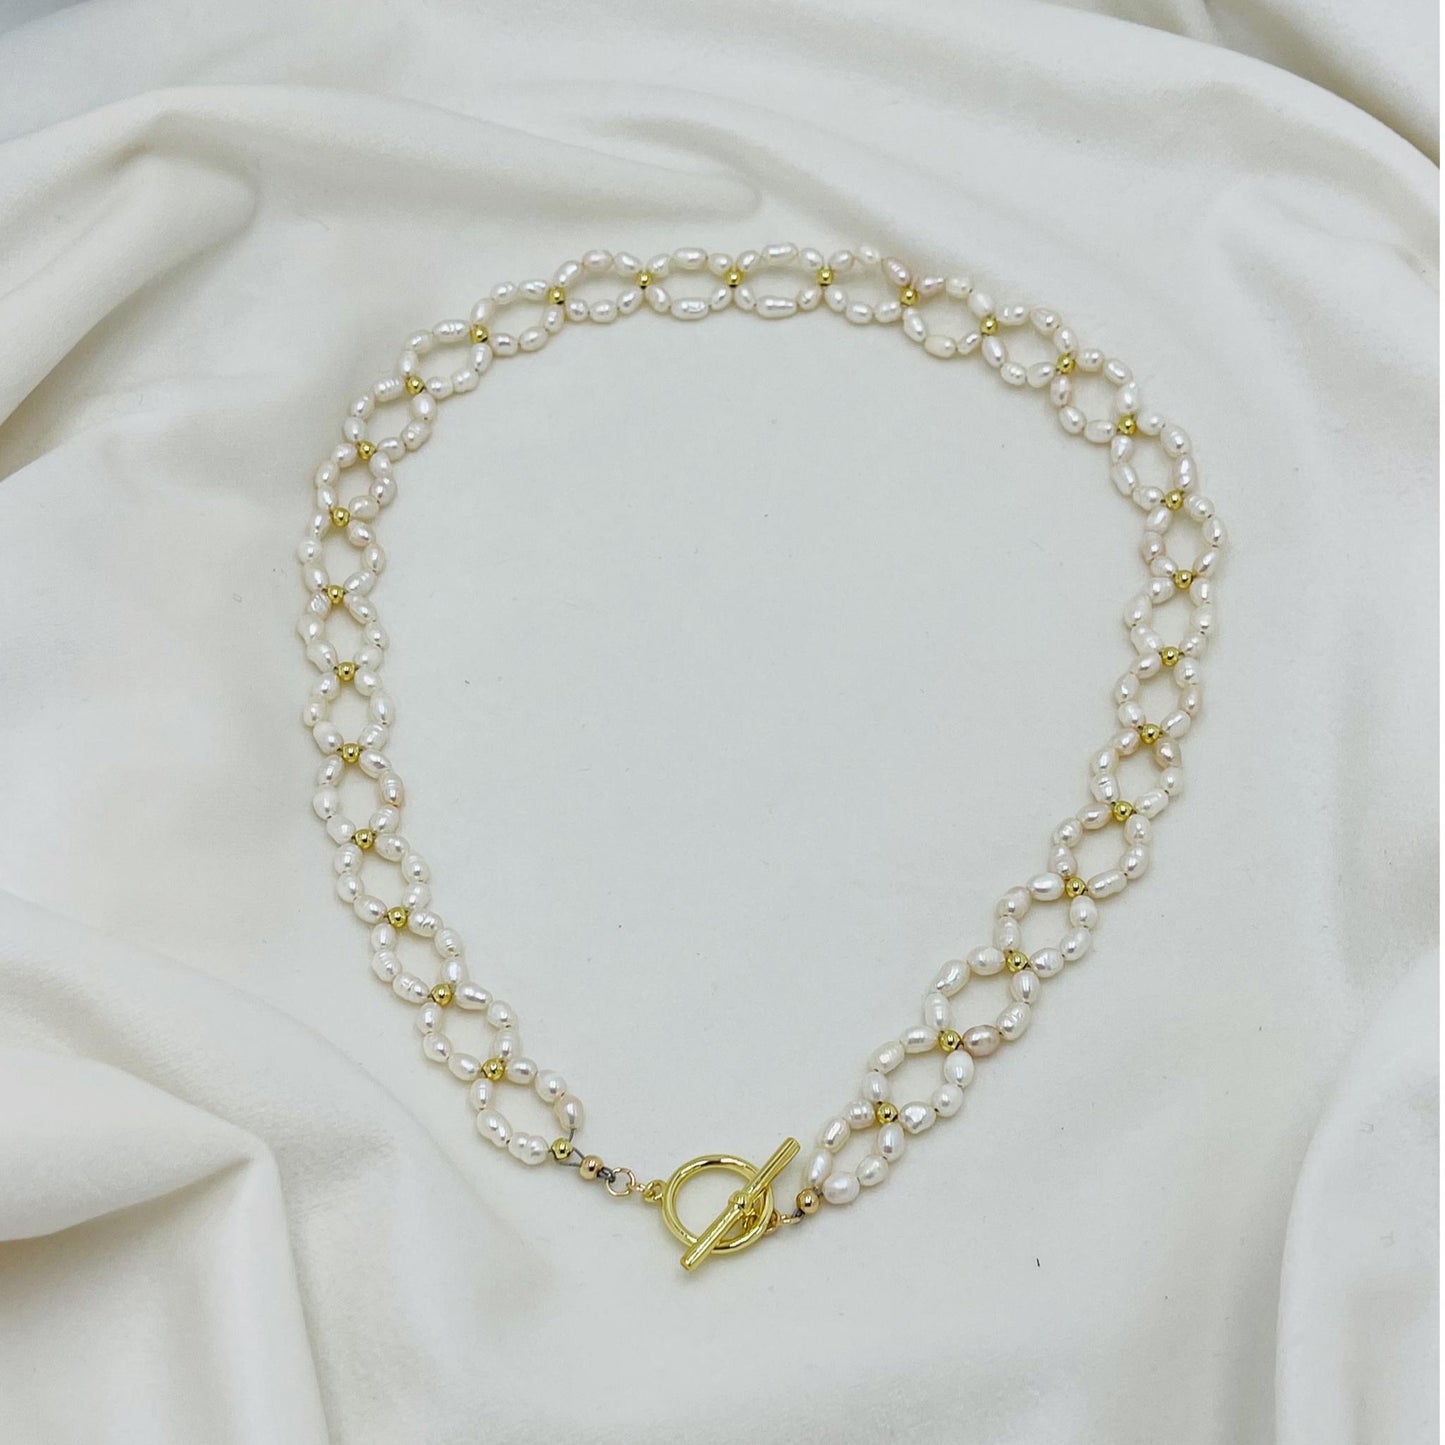 Freshwater Pearl Necklace-Gold Necklace-Choker Style Necklace-Front Toggle Closure-Carabella By Cheryl